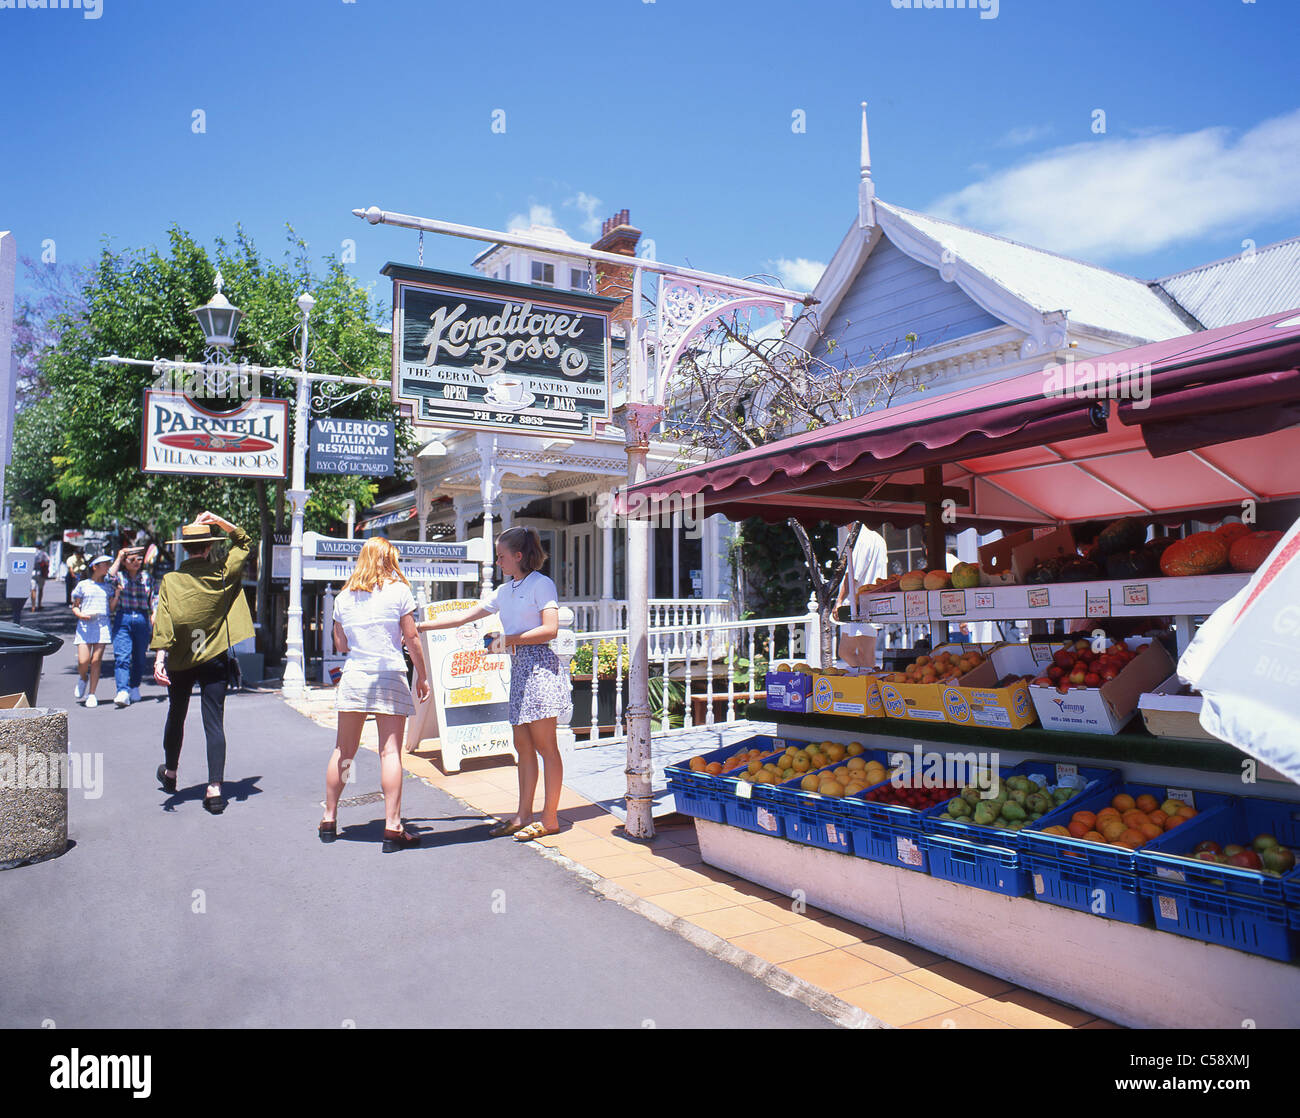 Parnell Village shops, Parnell Rise, Parnell, Auckland, Auckland Region, North Island, New Zealand Stock Photo